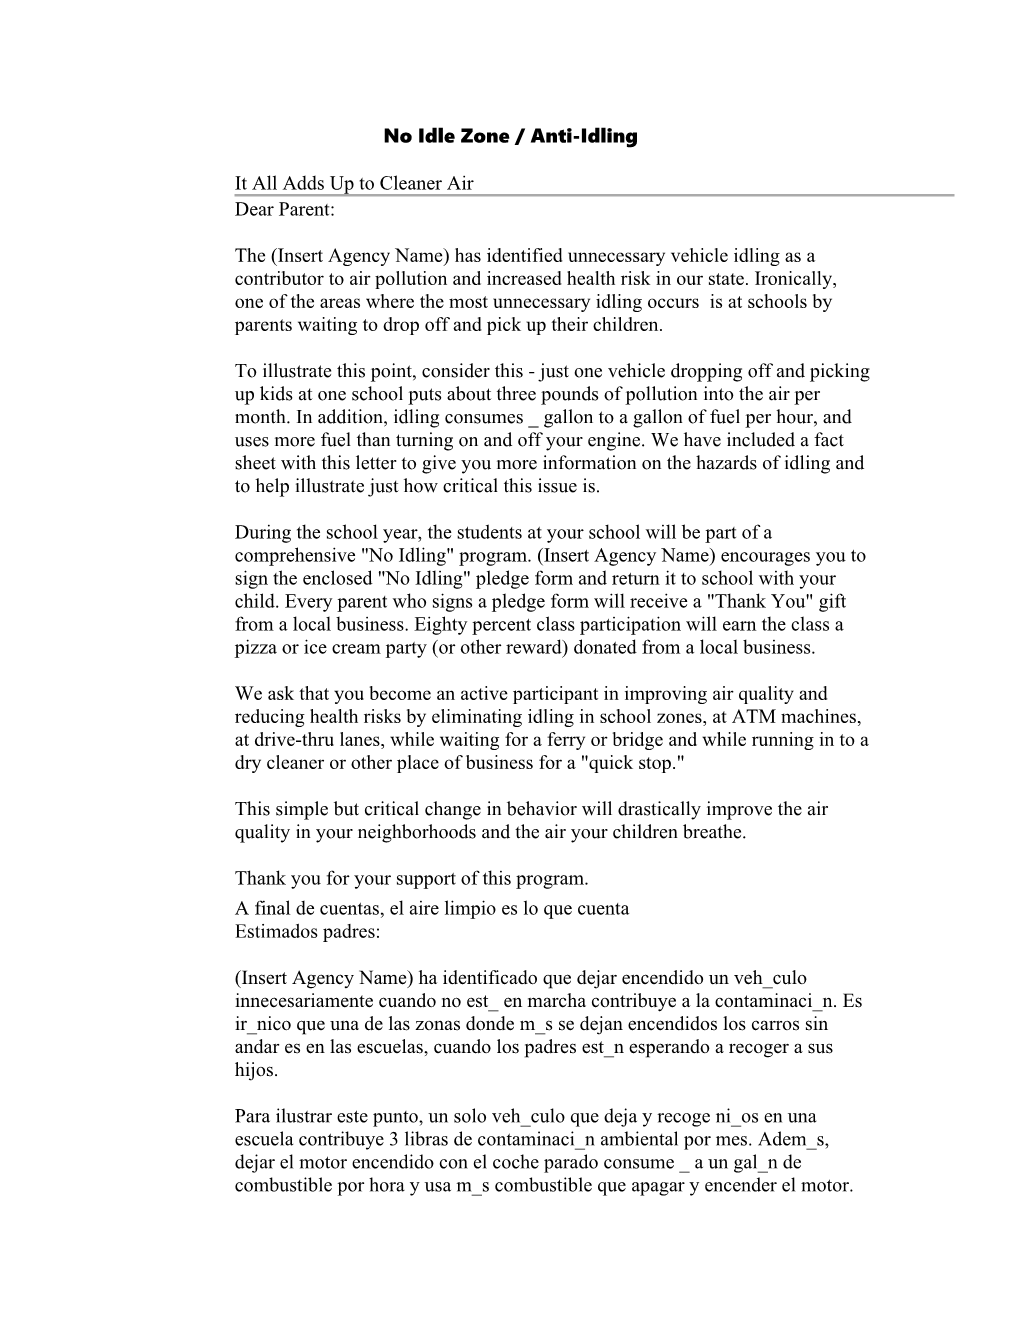 Air Watch Northwest Anti Idling Letter to Parent Eng to Spanish